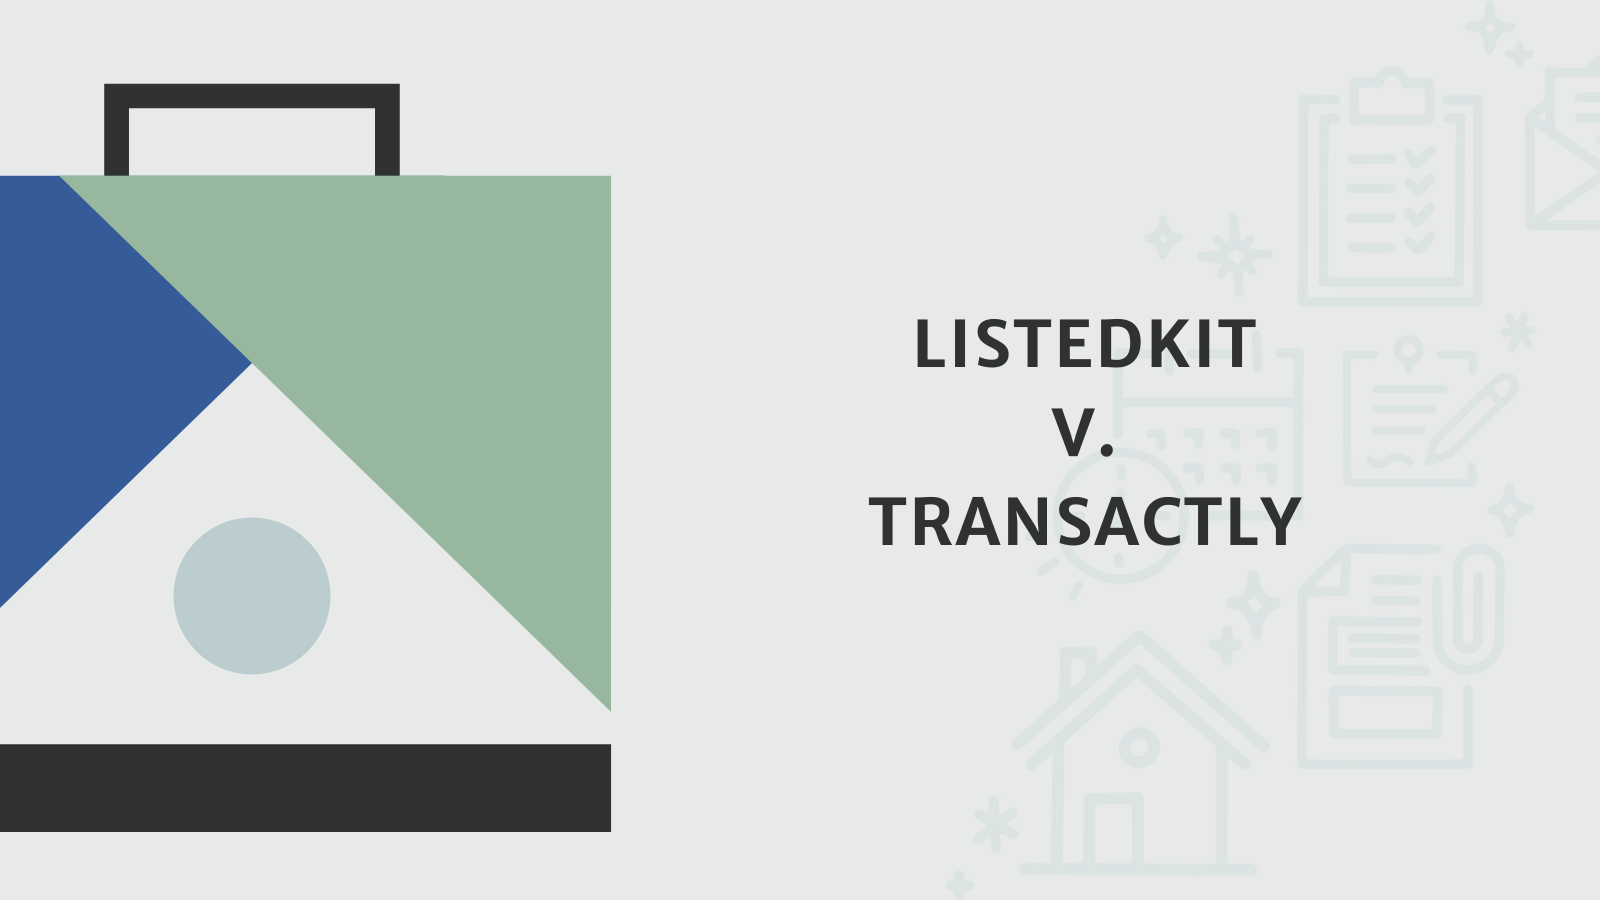 ListedKit v. Transactly: The Complete Guide